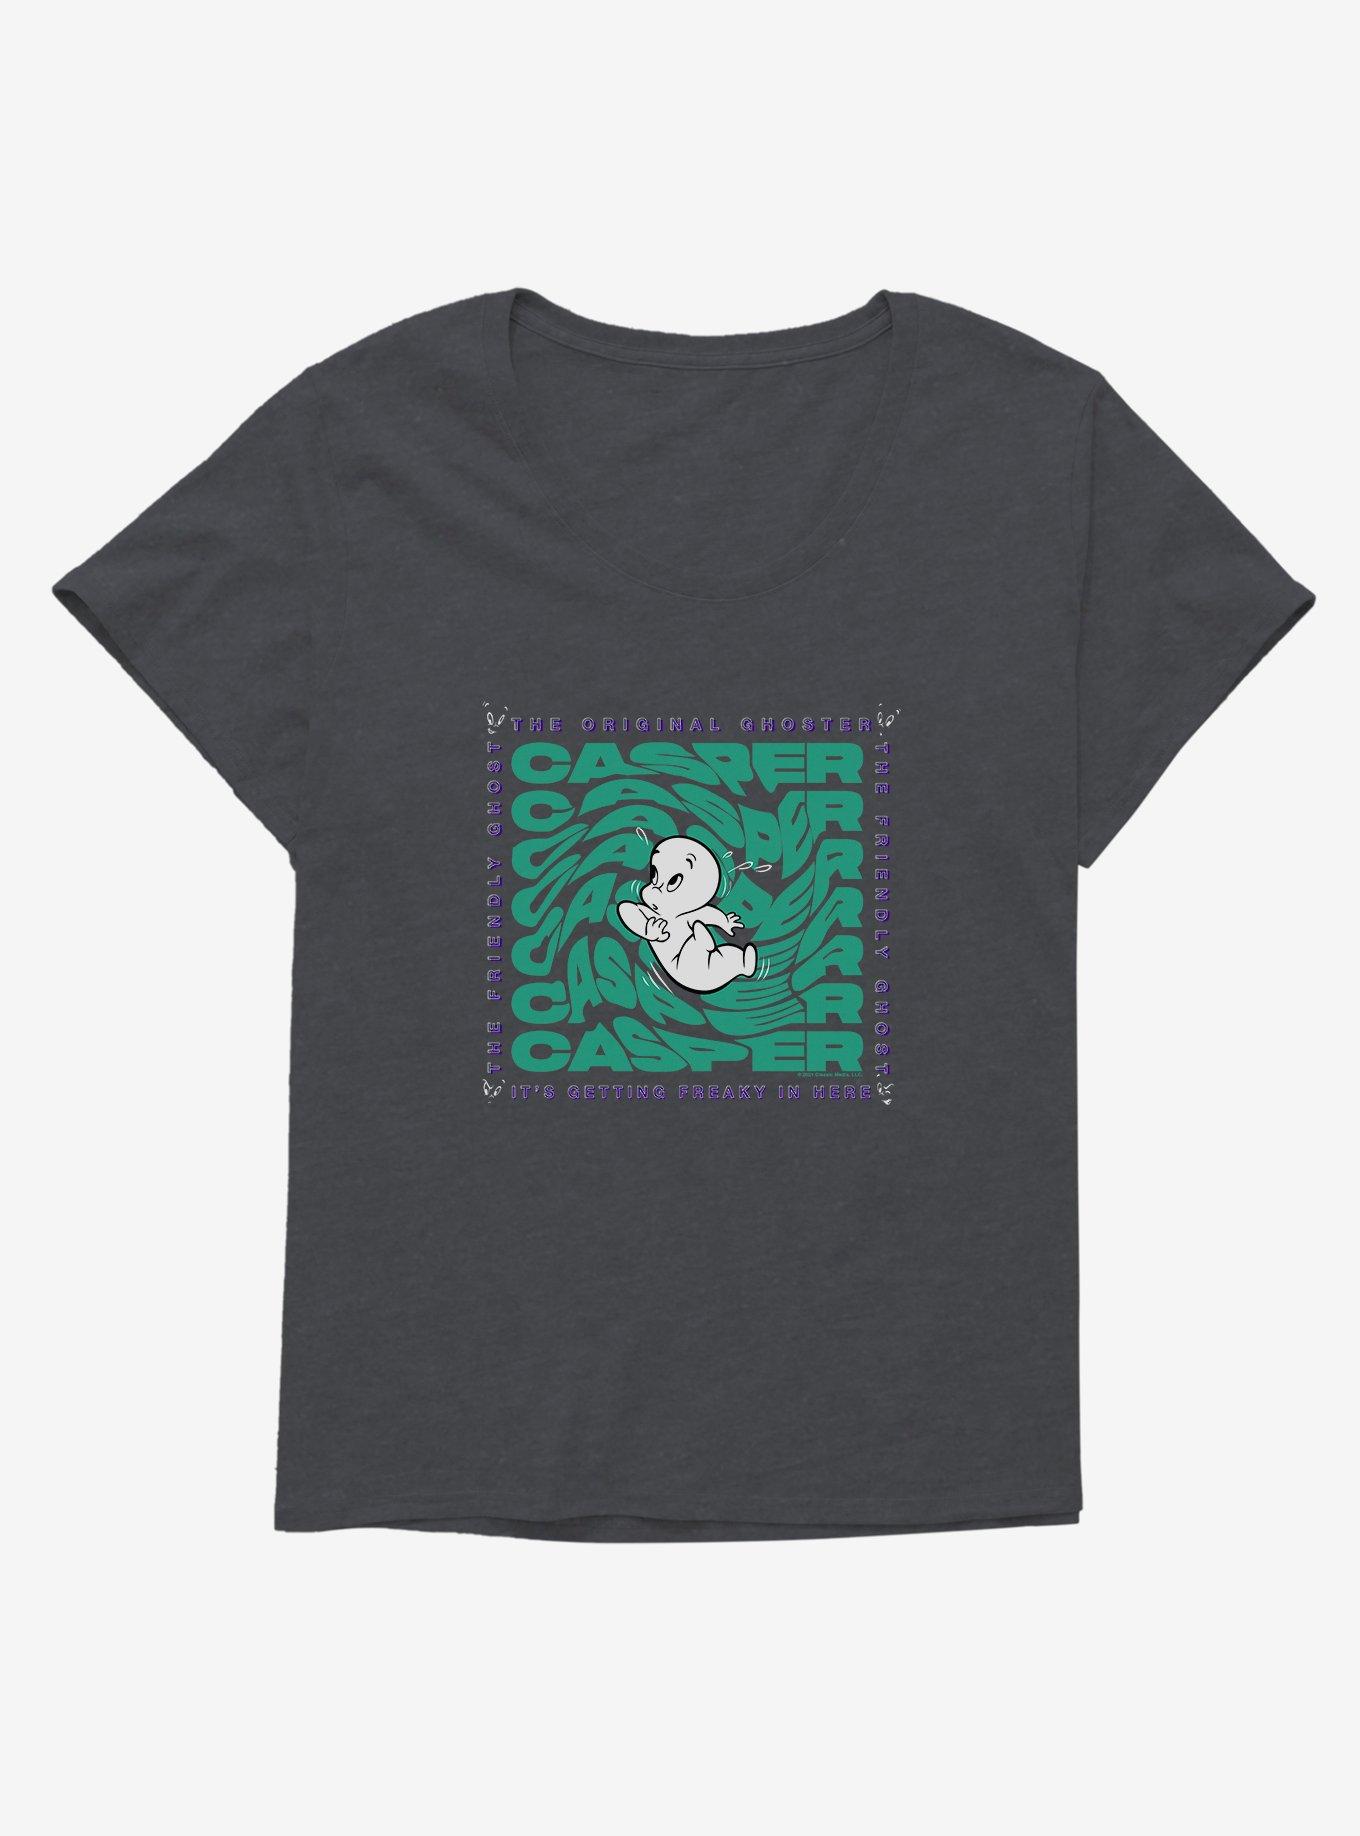 Casper The Friendly Ghost Virtual Raver Freaky Here Girls T-Shirt Plus Size, CHARCOAL HEATHER, hi-res